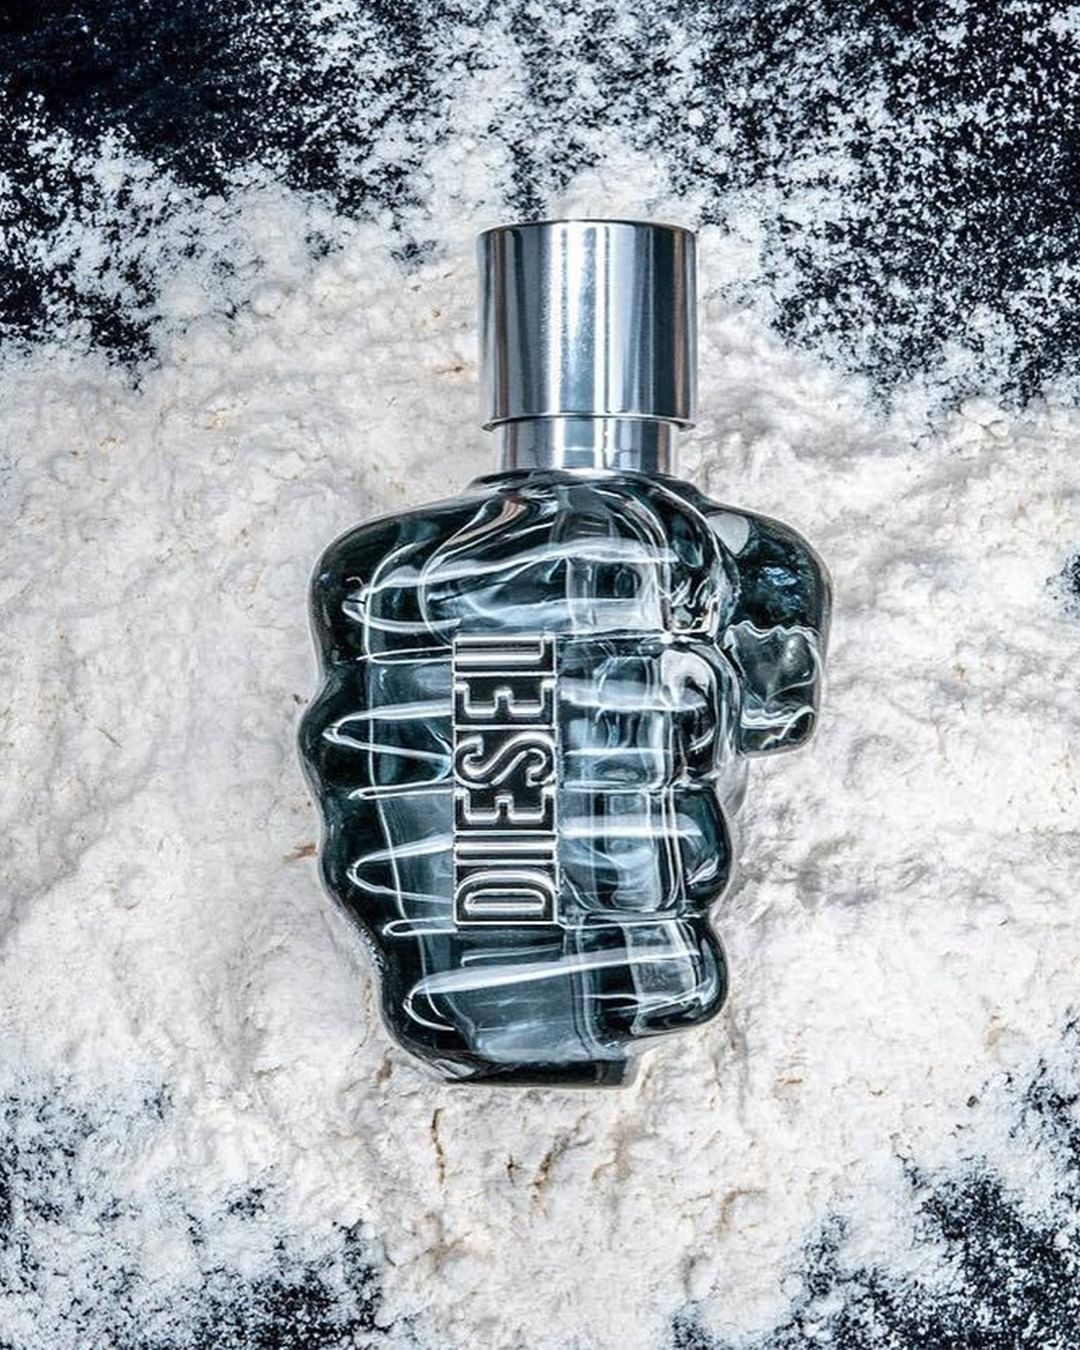 7/24 Perfumes - Discover Diesel perfumes from our website.
Use code: SALE15

#724Perfumes #man #perfumes